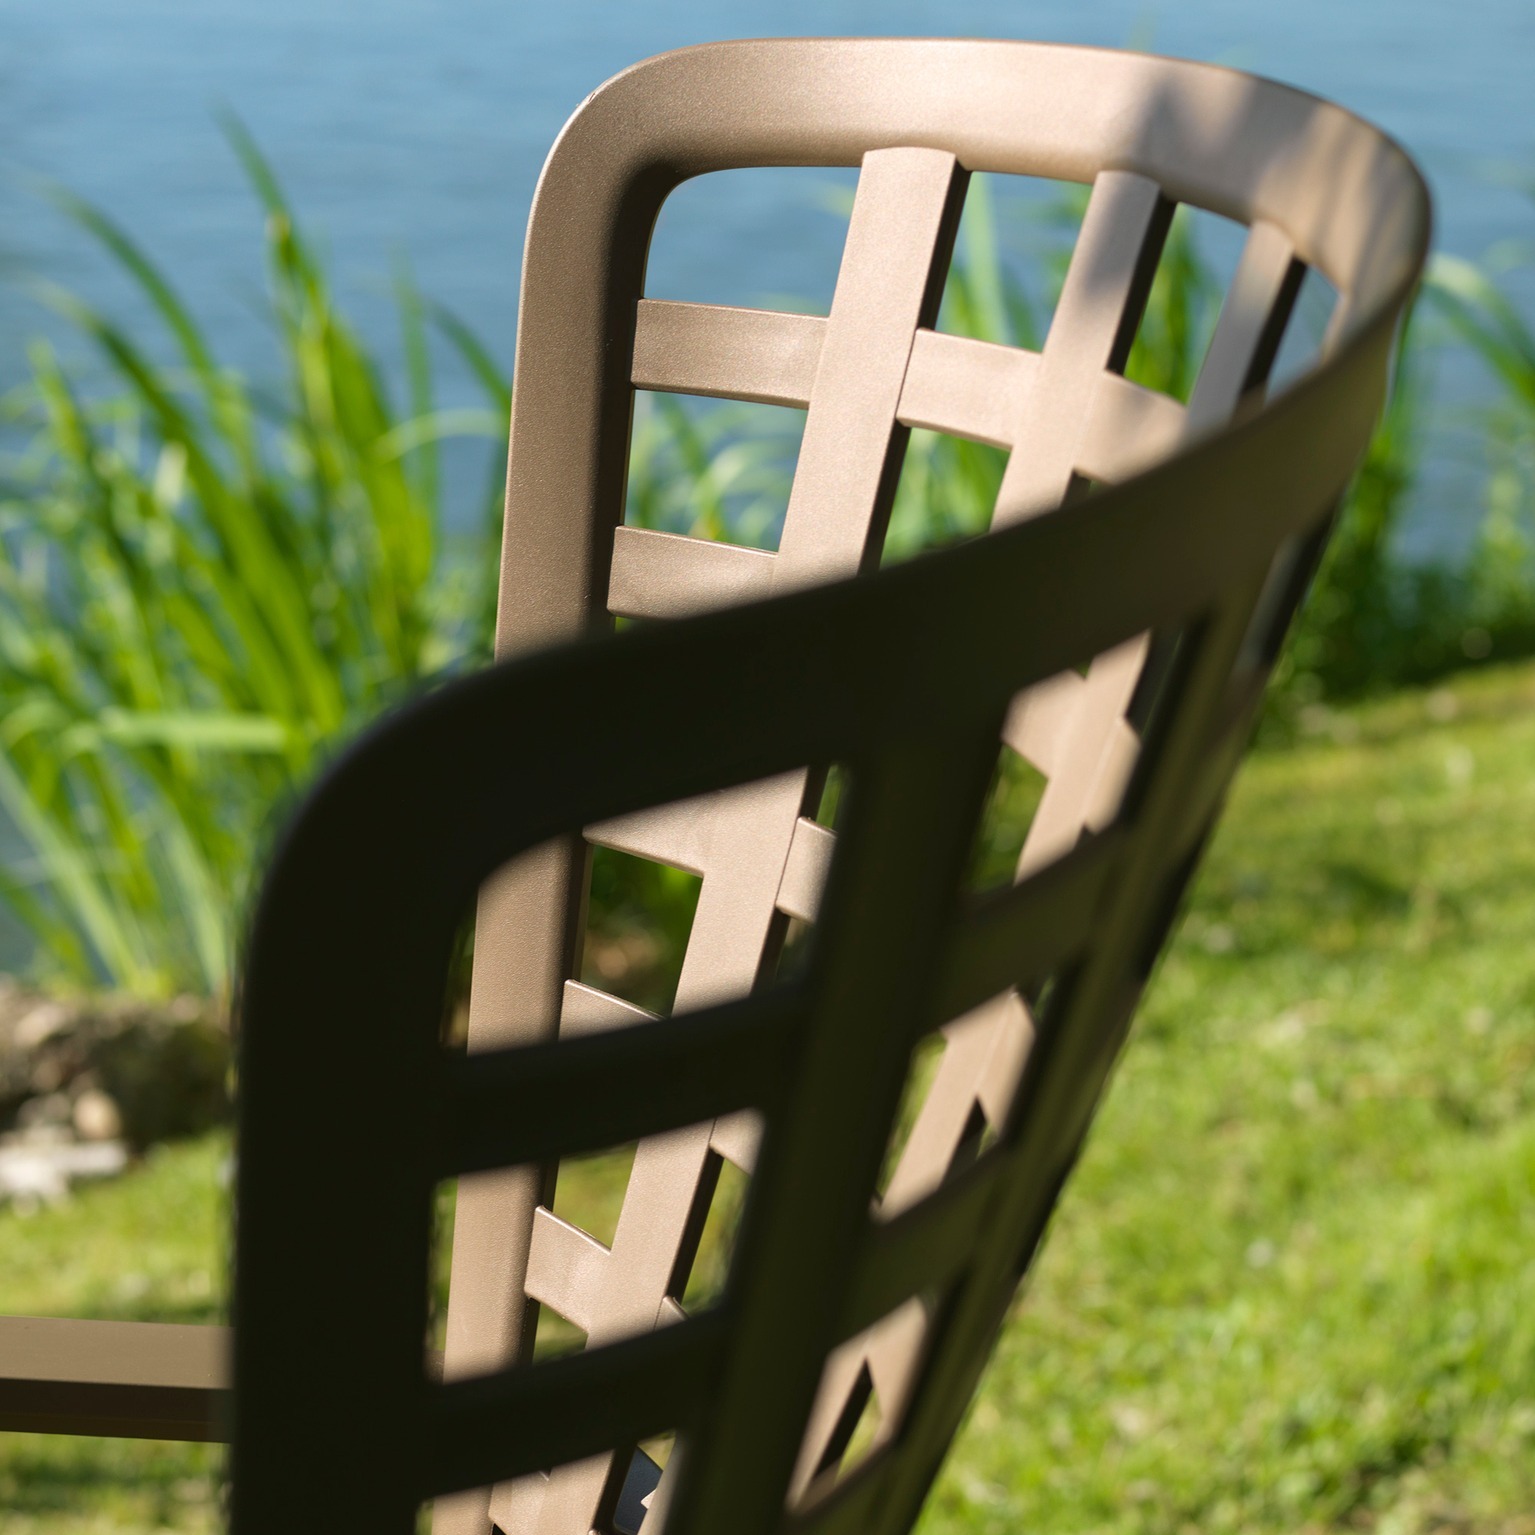 Folio is a relaxation armchair for outdoor use made of fiberglass resin, with a perforated square pattern and a matt fin... » Outdoor Furniture Fuengirola, Costa Del Sol, Spain